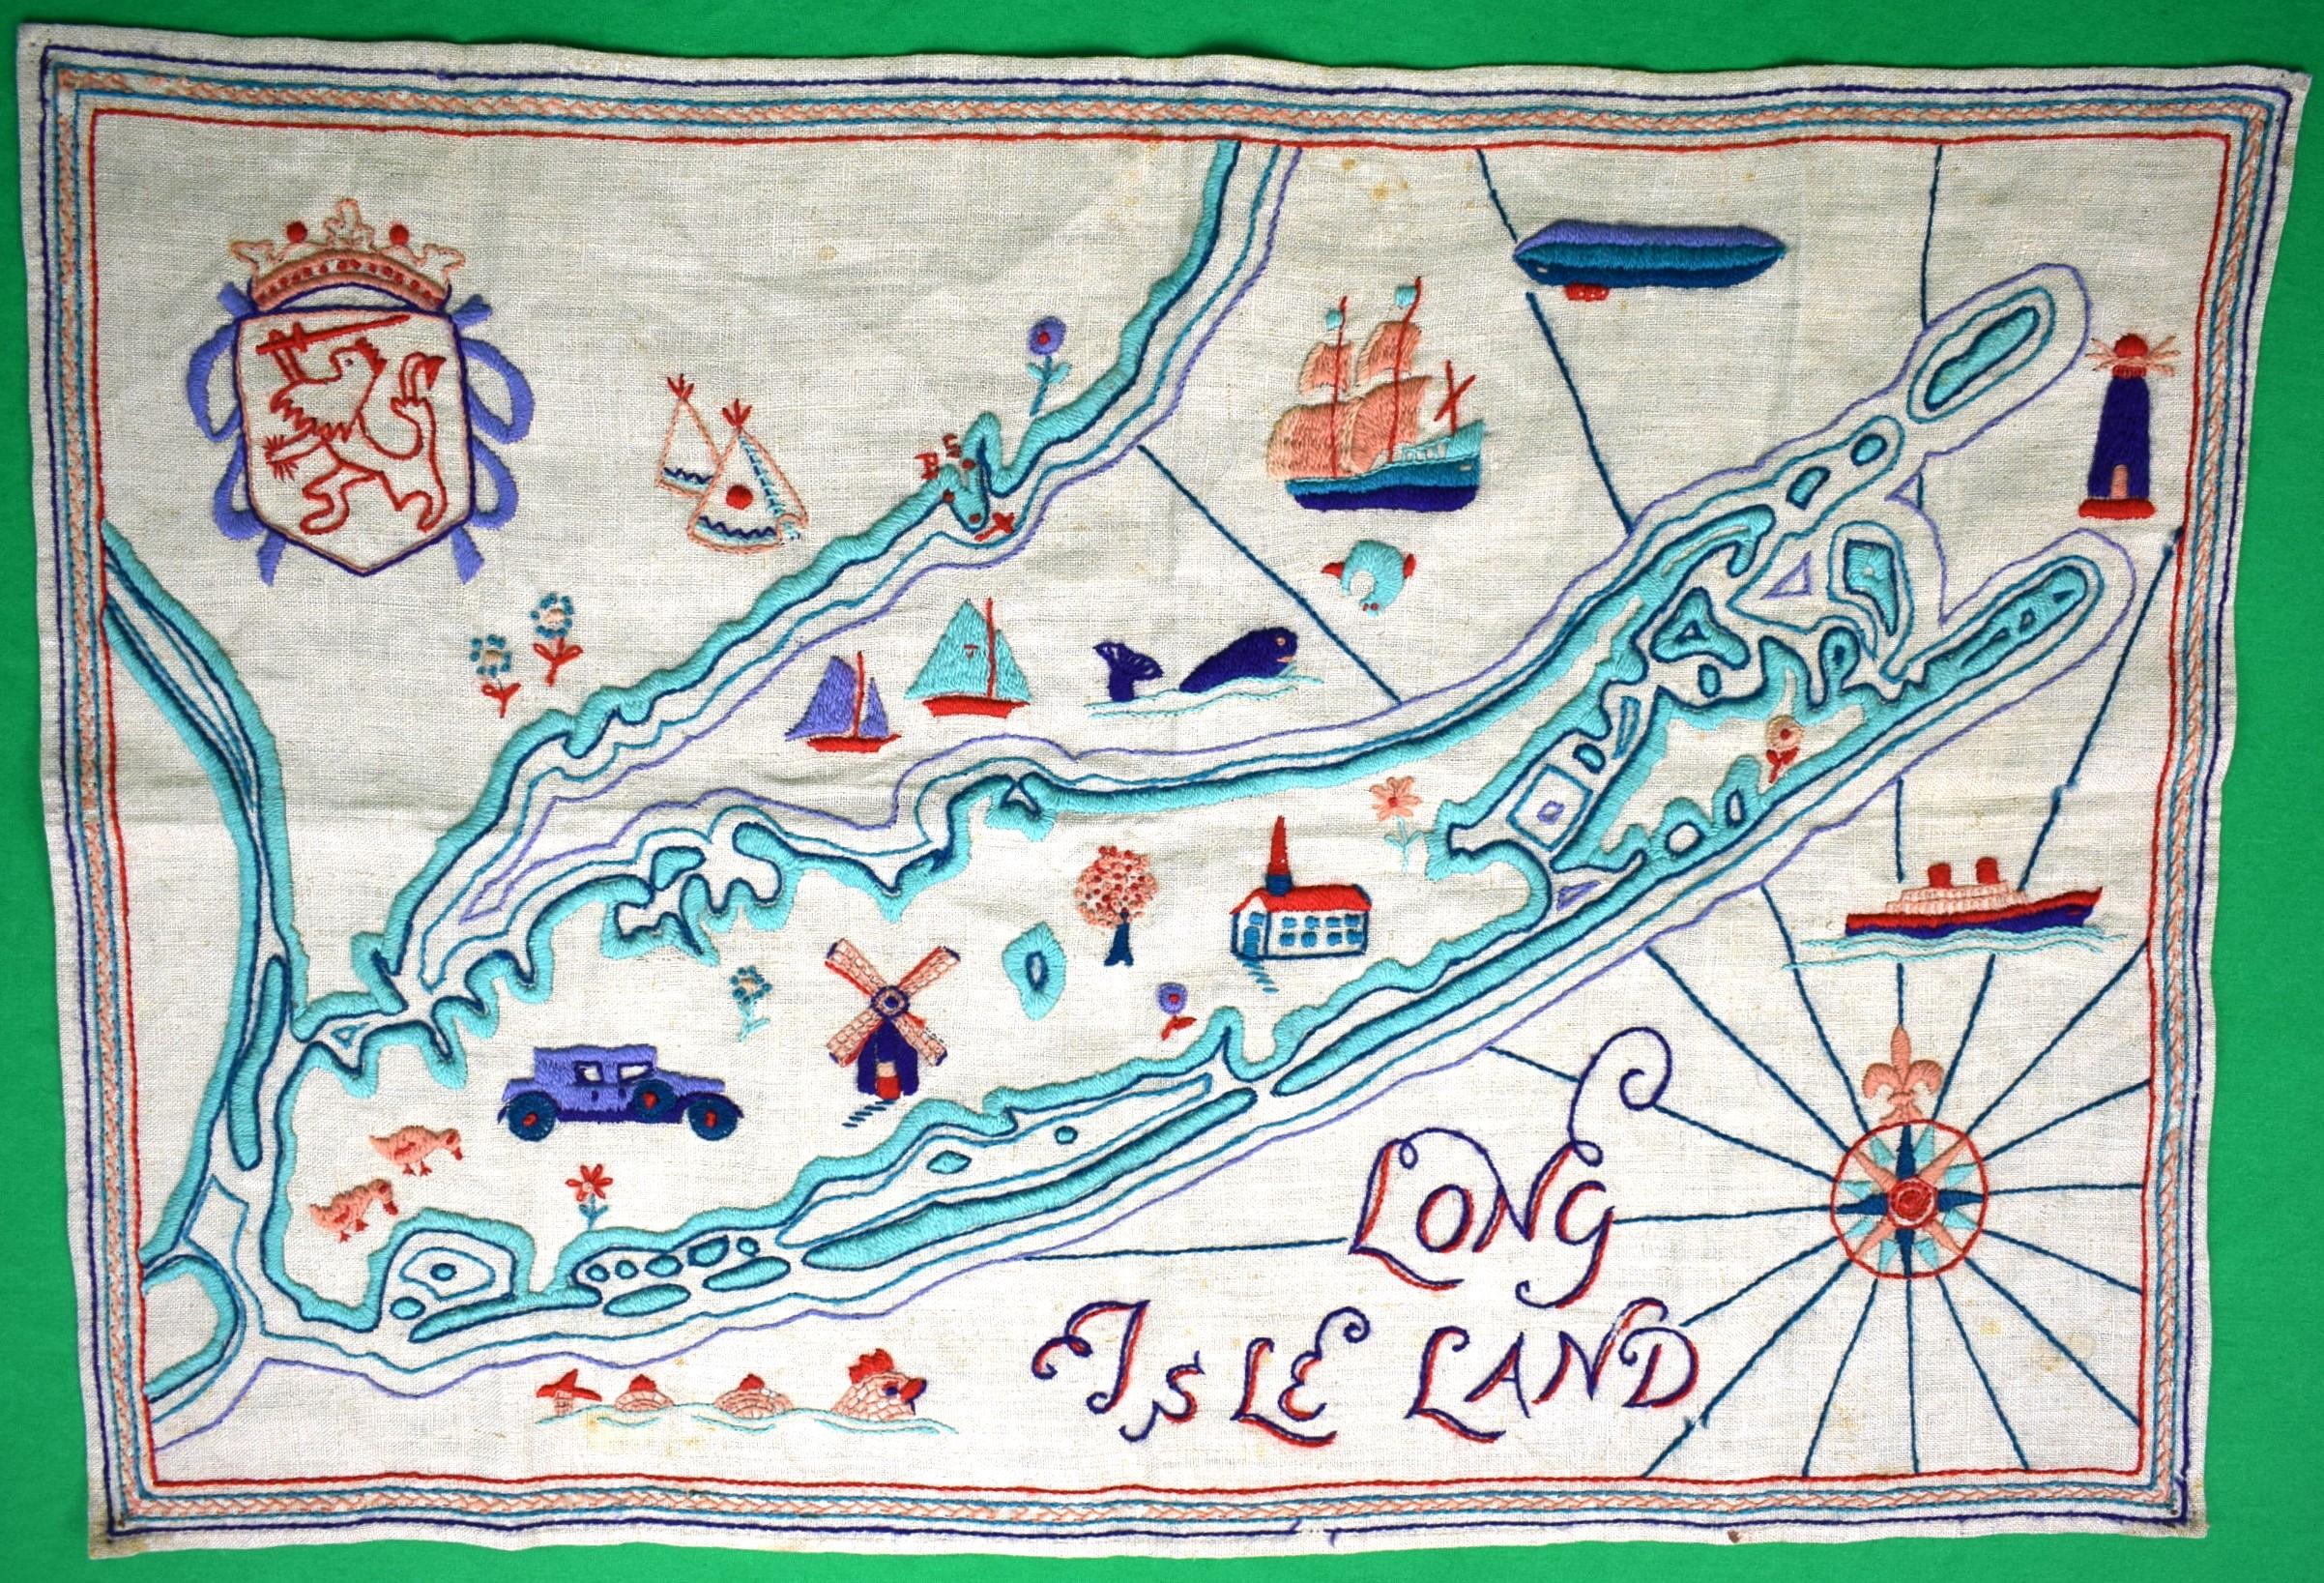 "Long Isle Land c1930s Crewelwork Linen Embroidered Map" - Mixed Media Art by Unknown